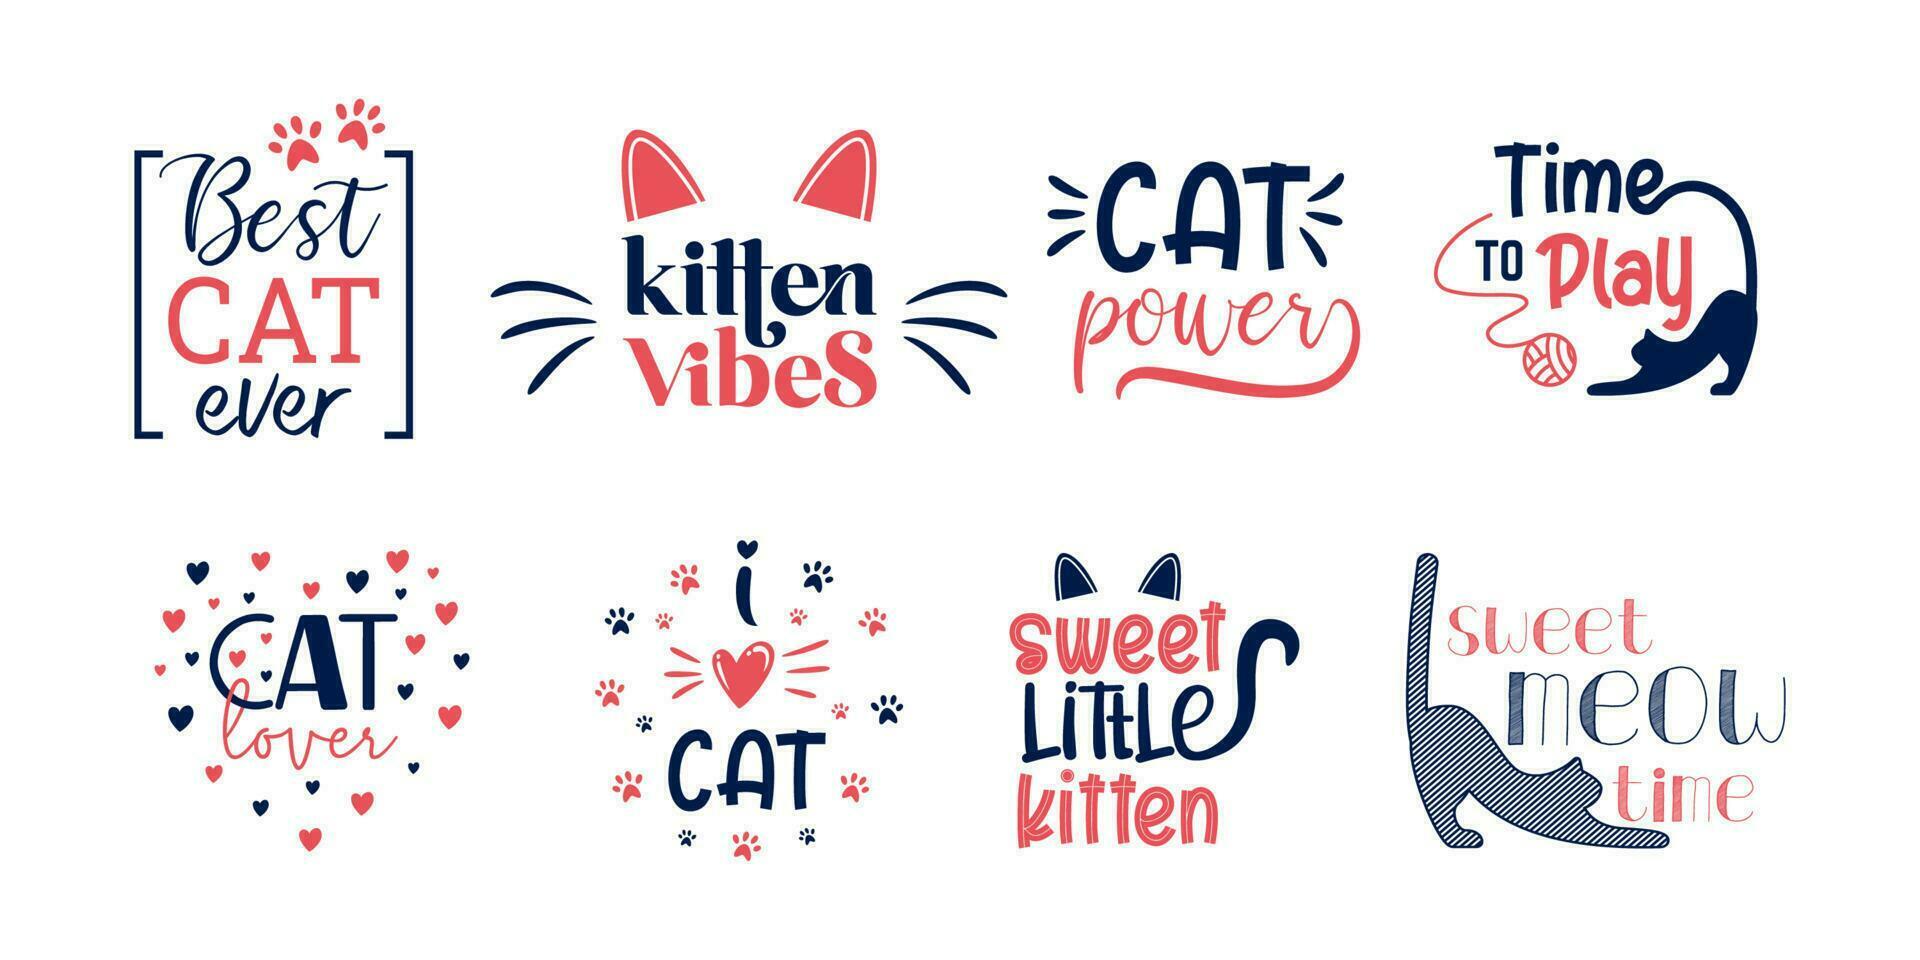 Cat lover, cat quotes inspiration, lettering about cat vector